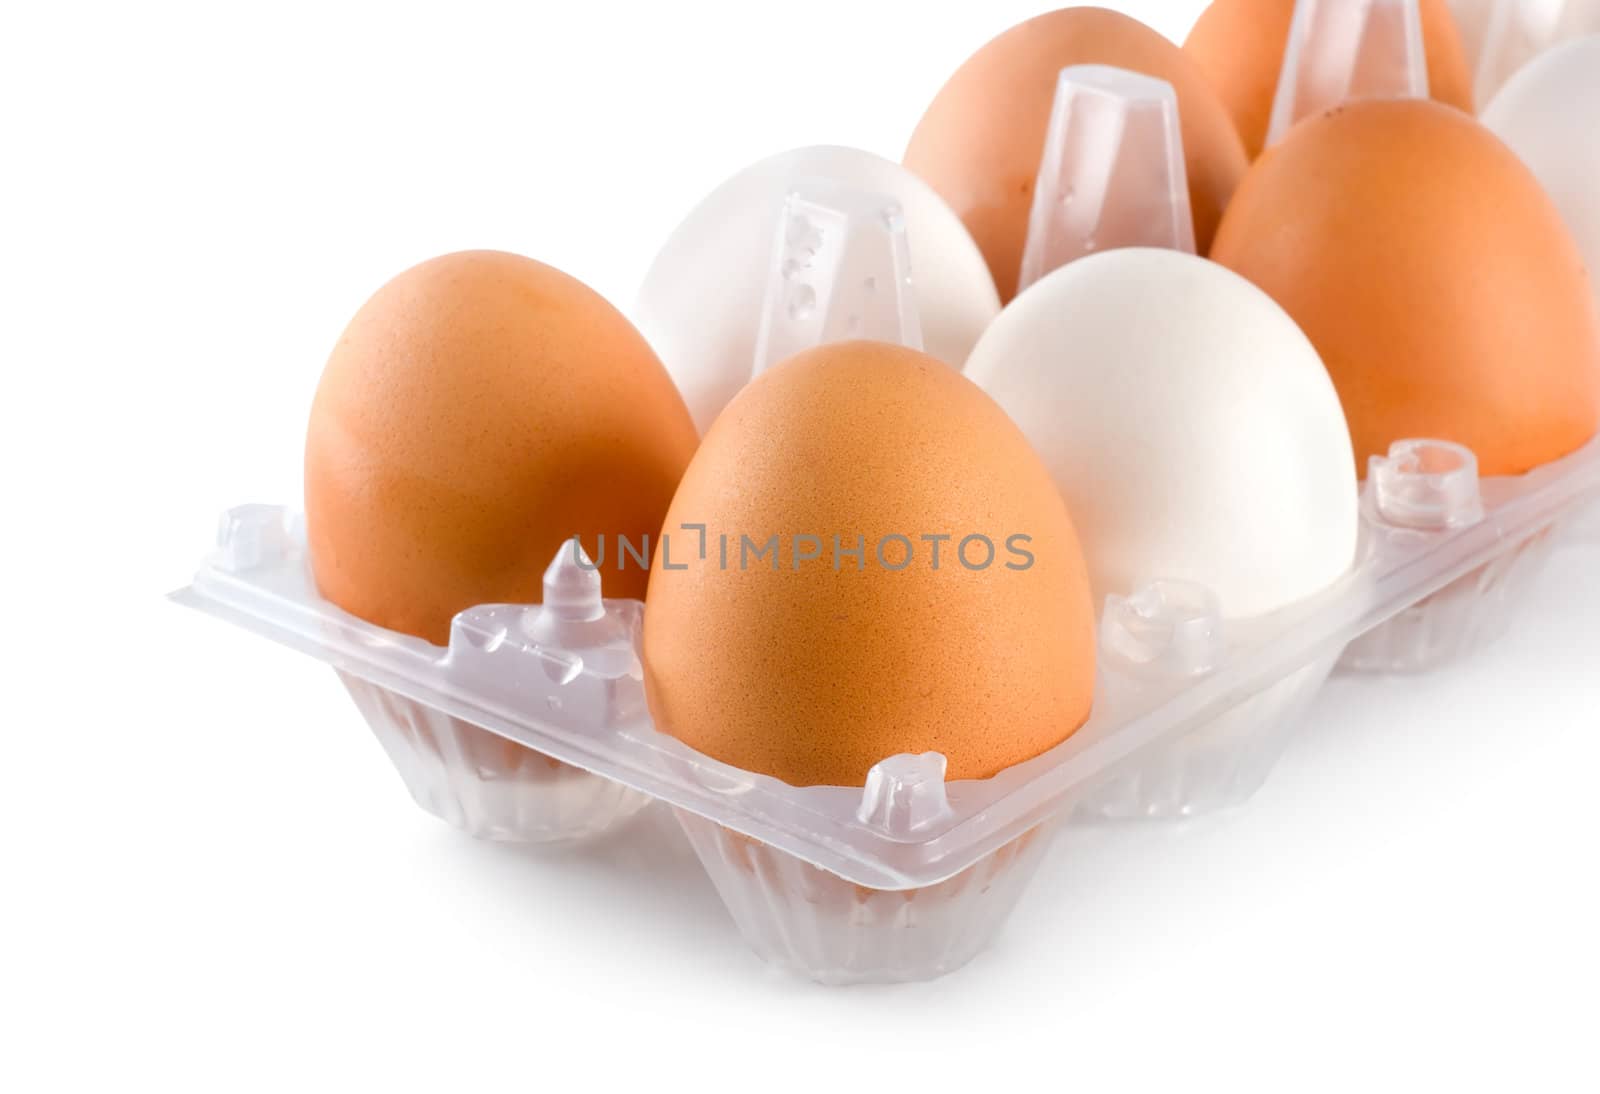 Tray of eggs isolated on white background